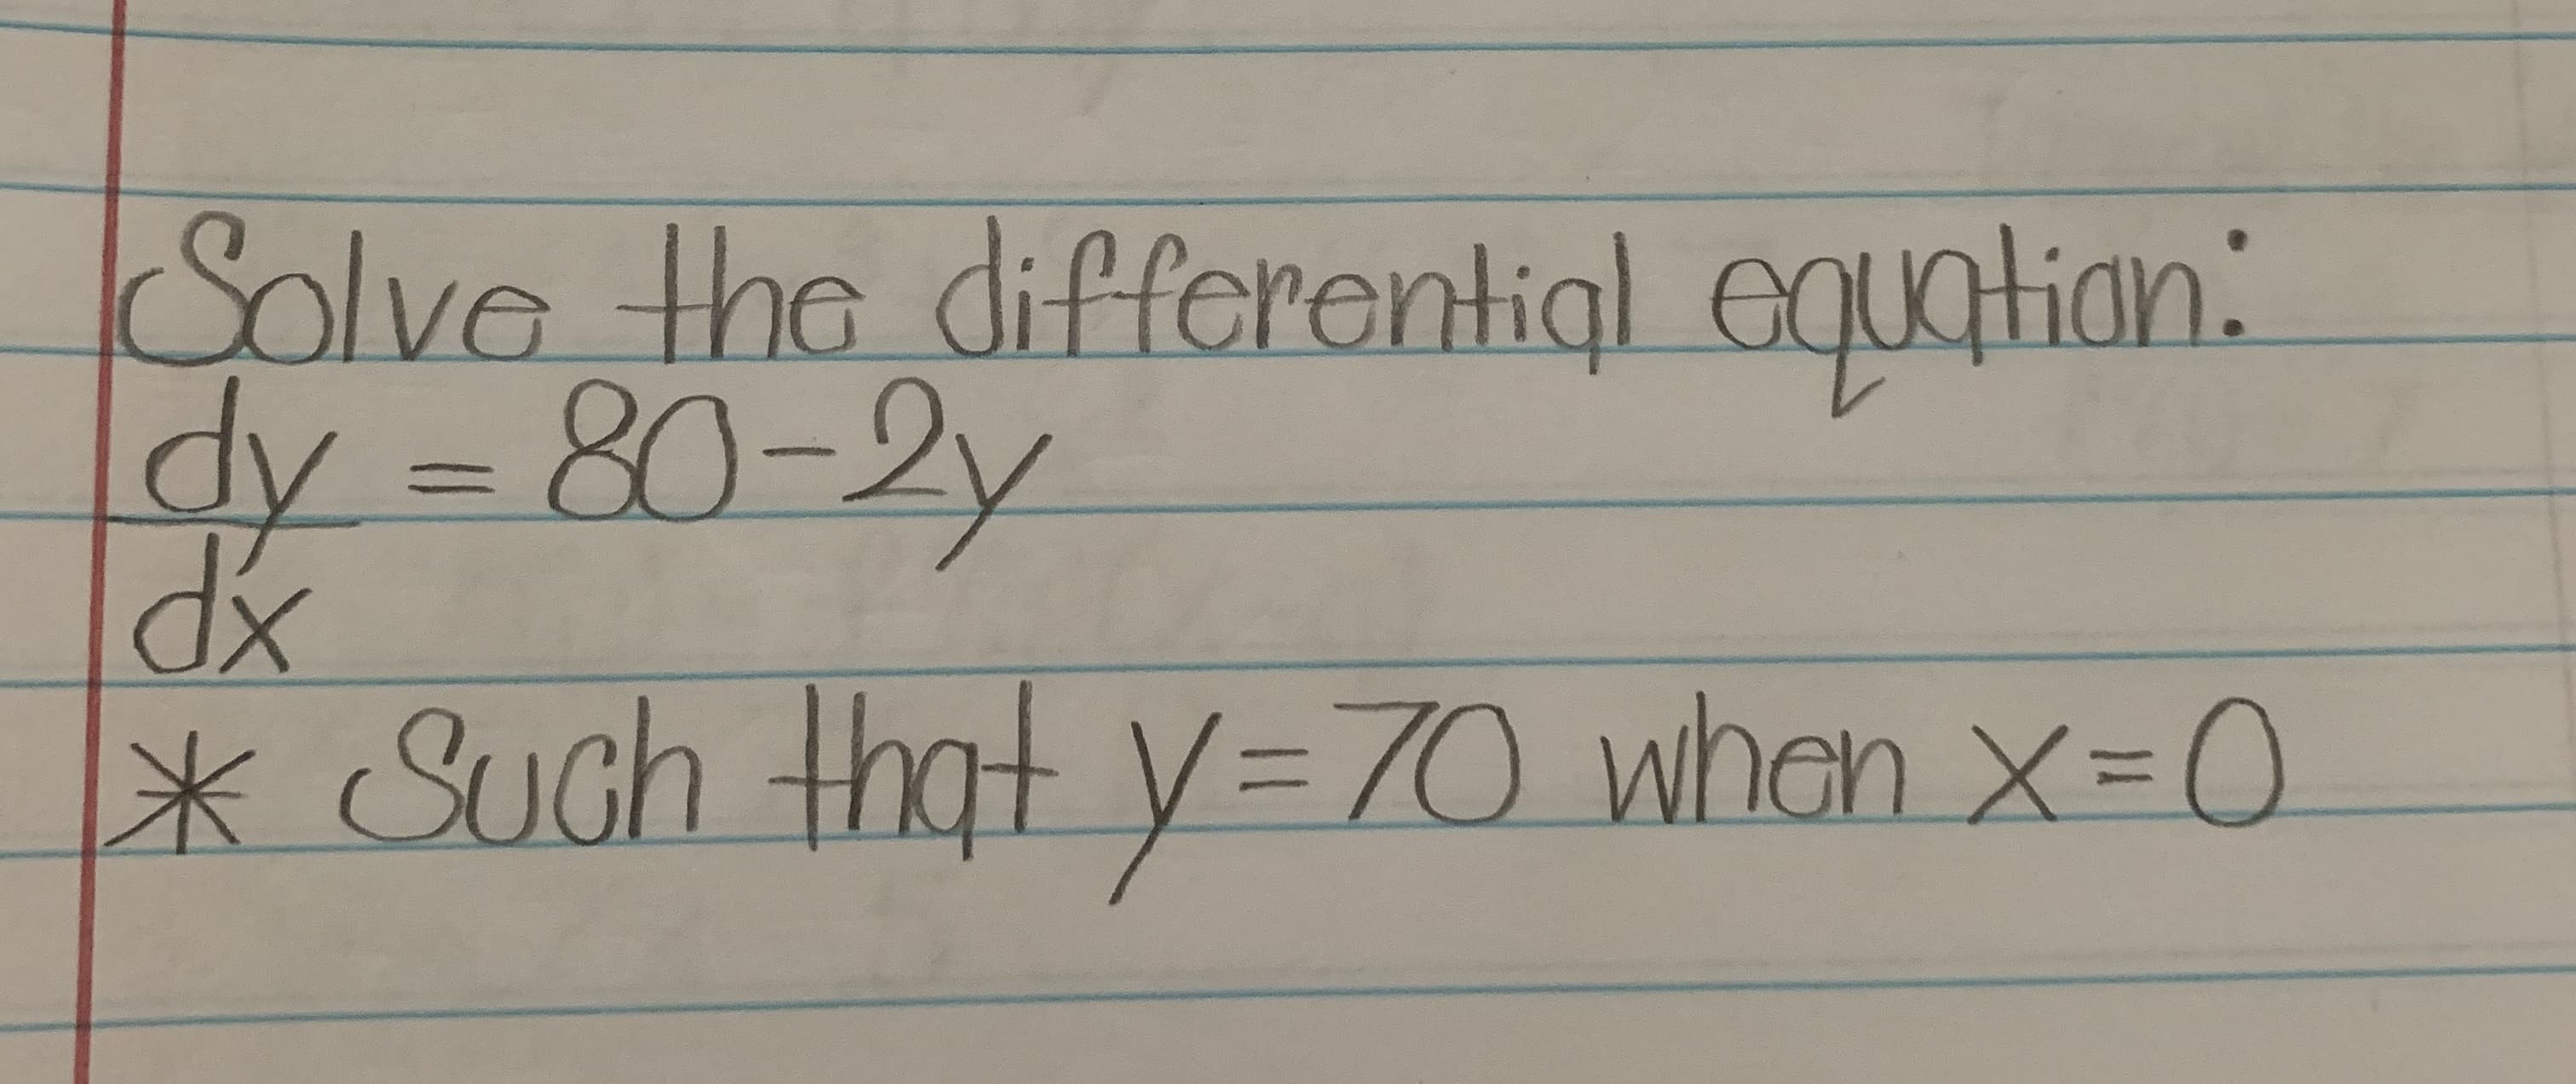 Solve equatian.
the differentiql
dy = 80-2y
* Such that y=70 when x=0
